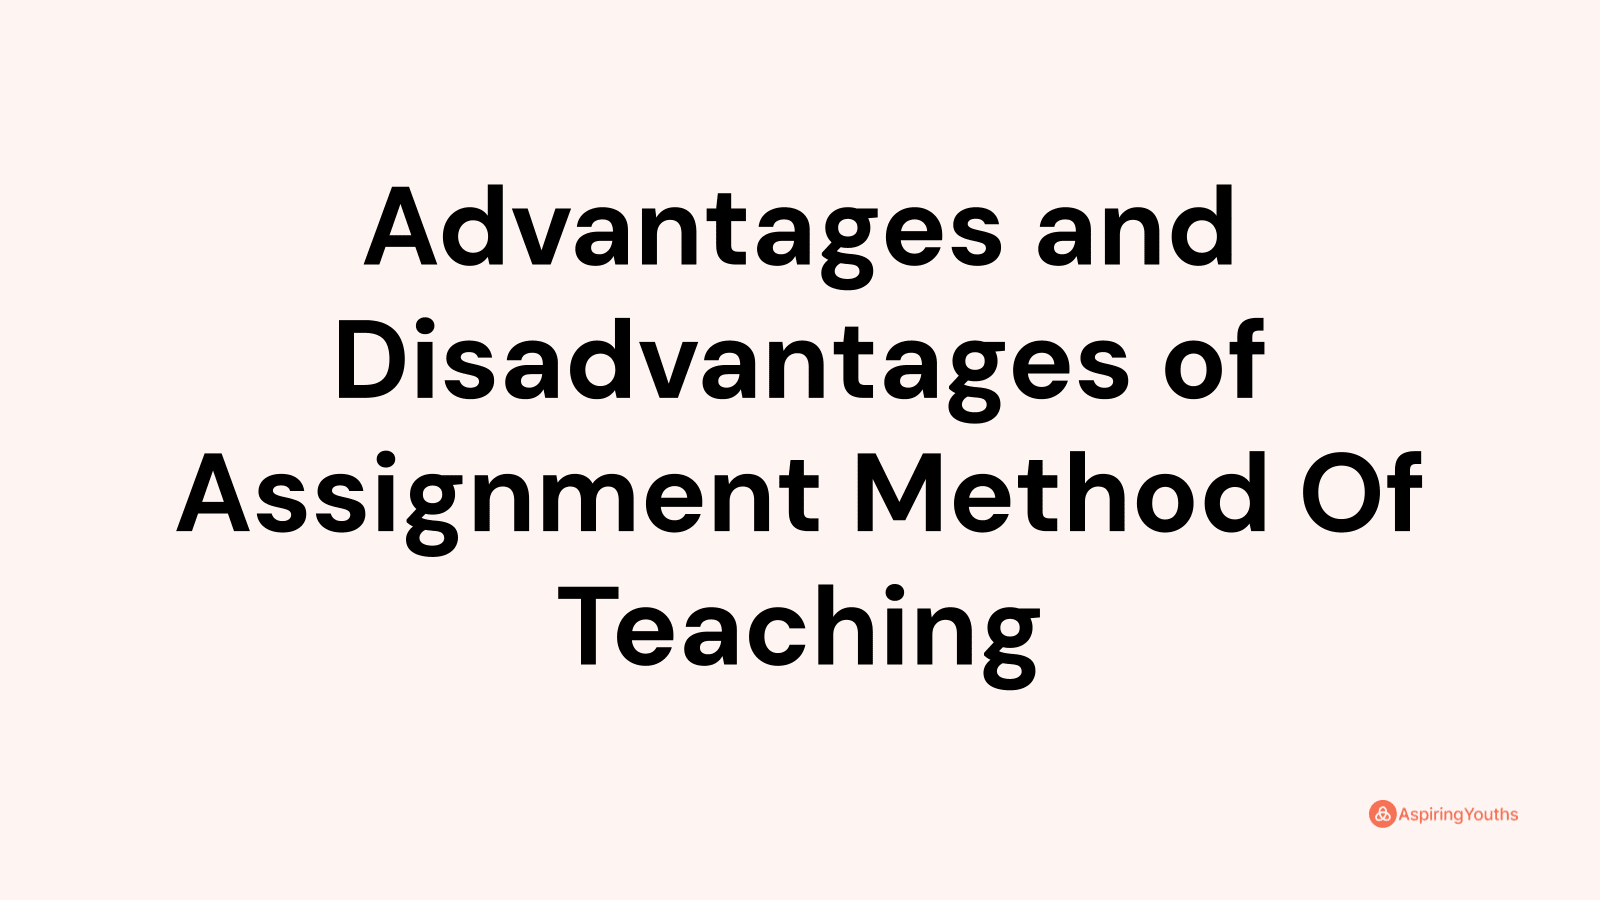 disadvantages of assignment method of teaching